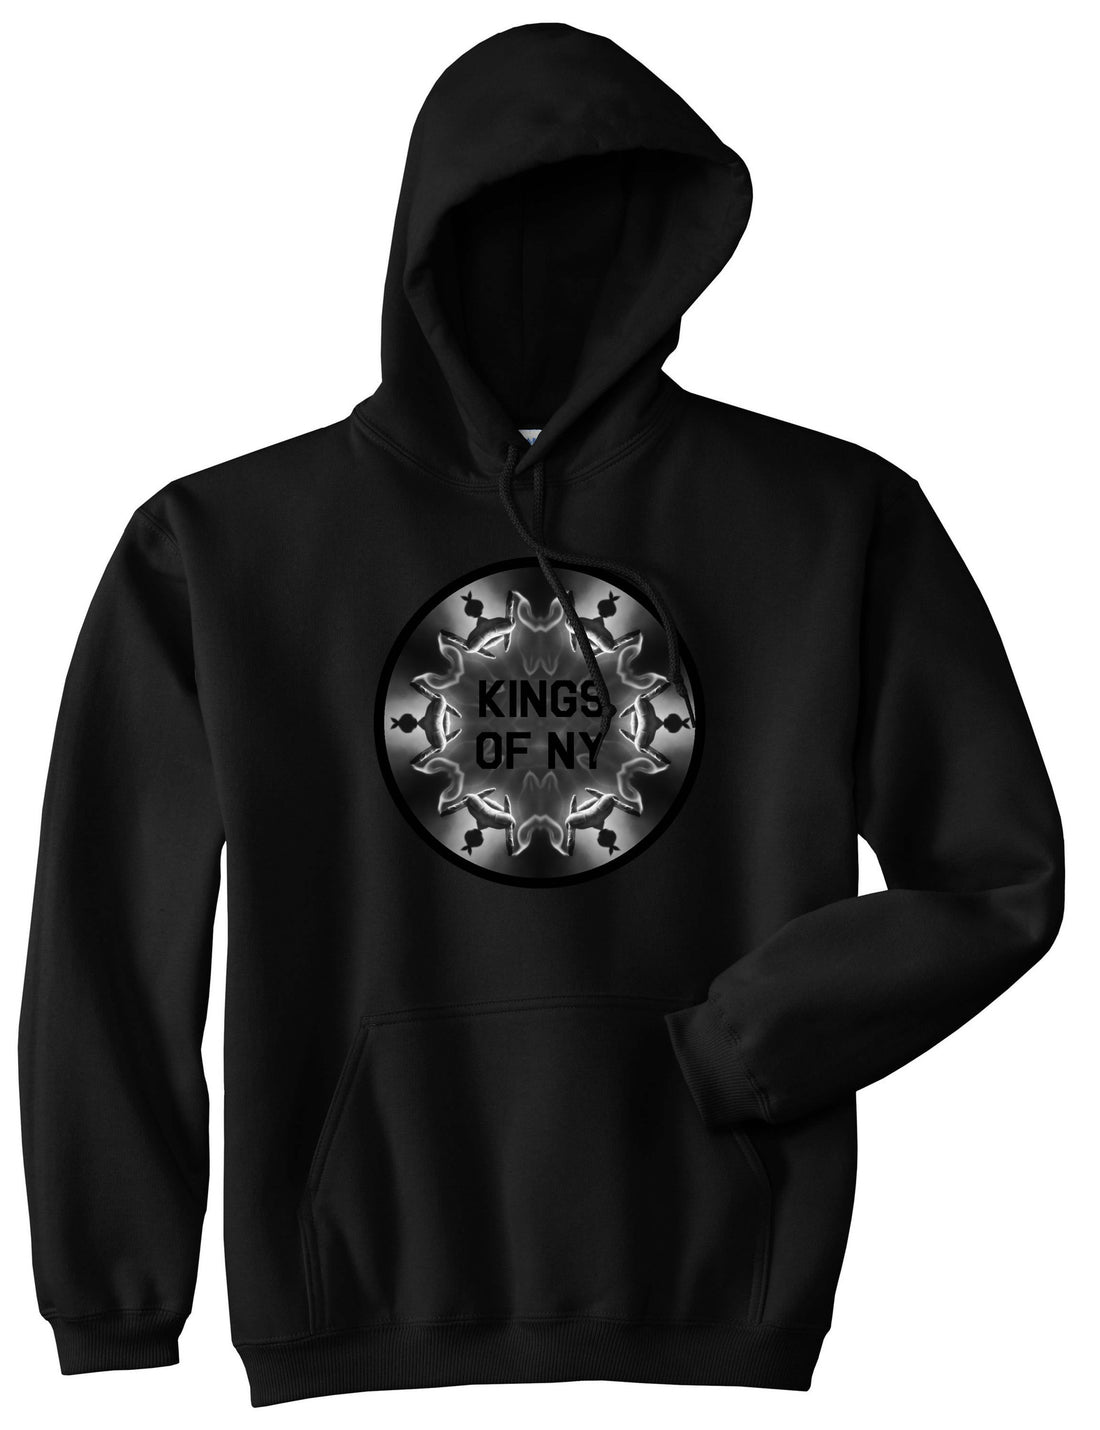 Pass That Blunt Pullover Hoodie in Black By Kings Of NY